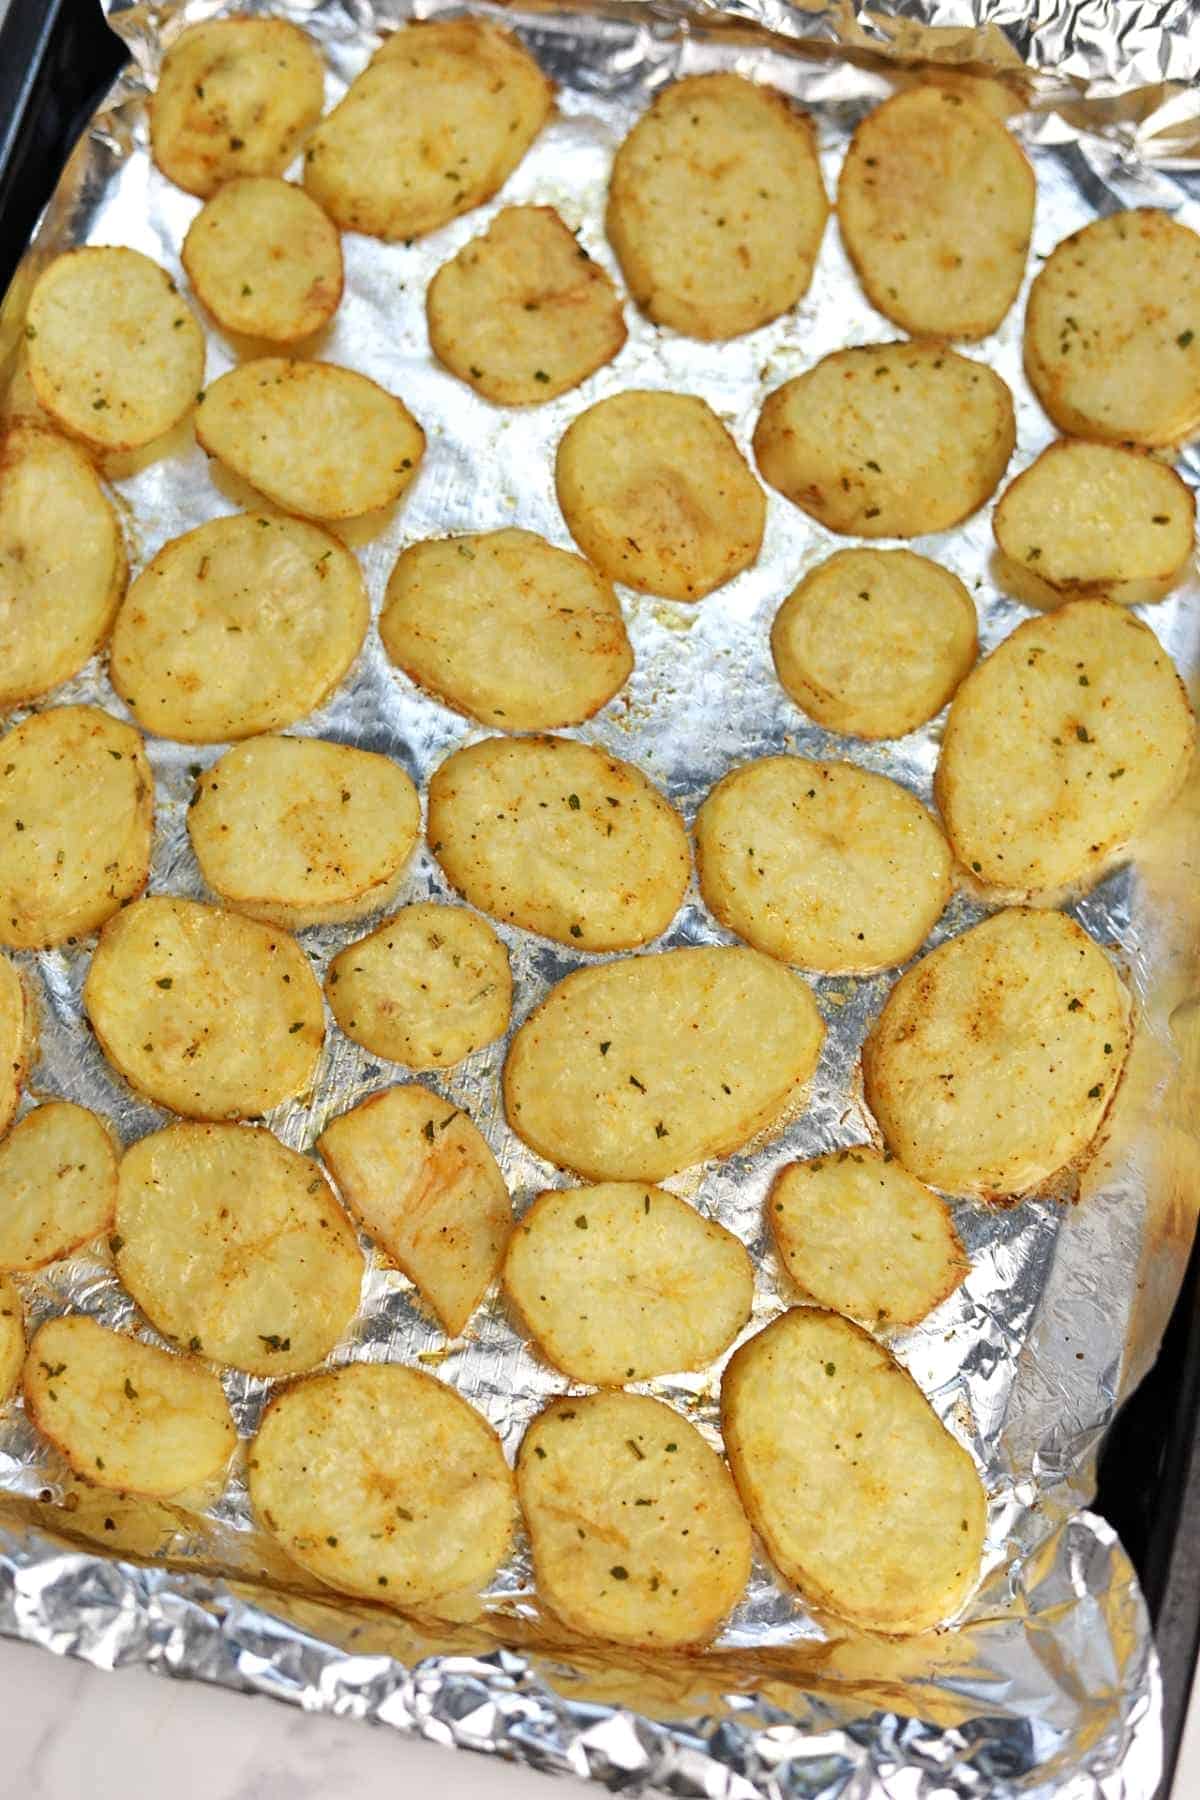 baked sliced potatoes on a baking tray.